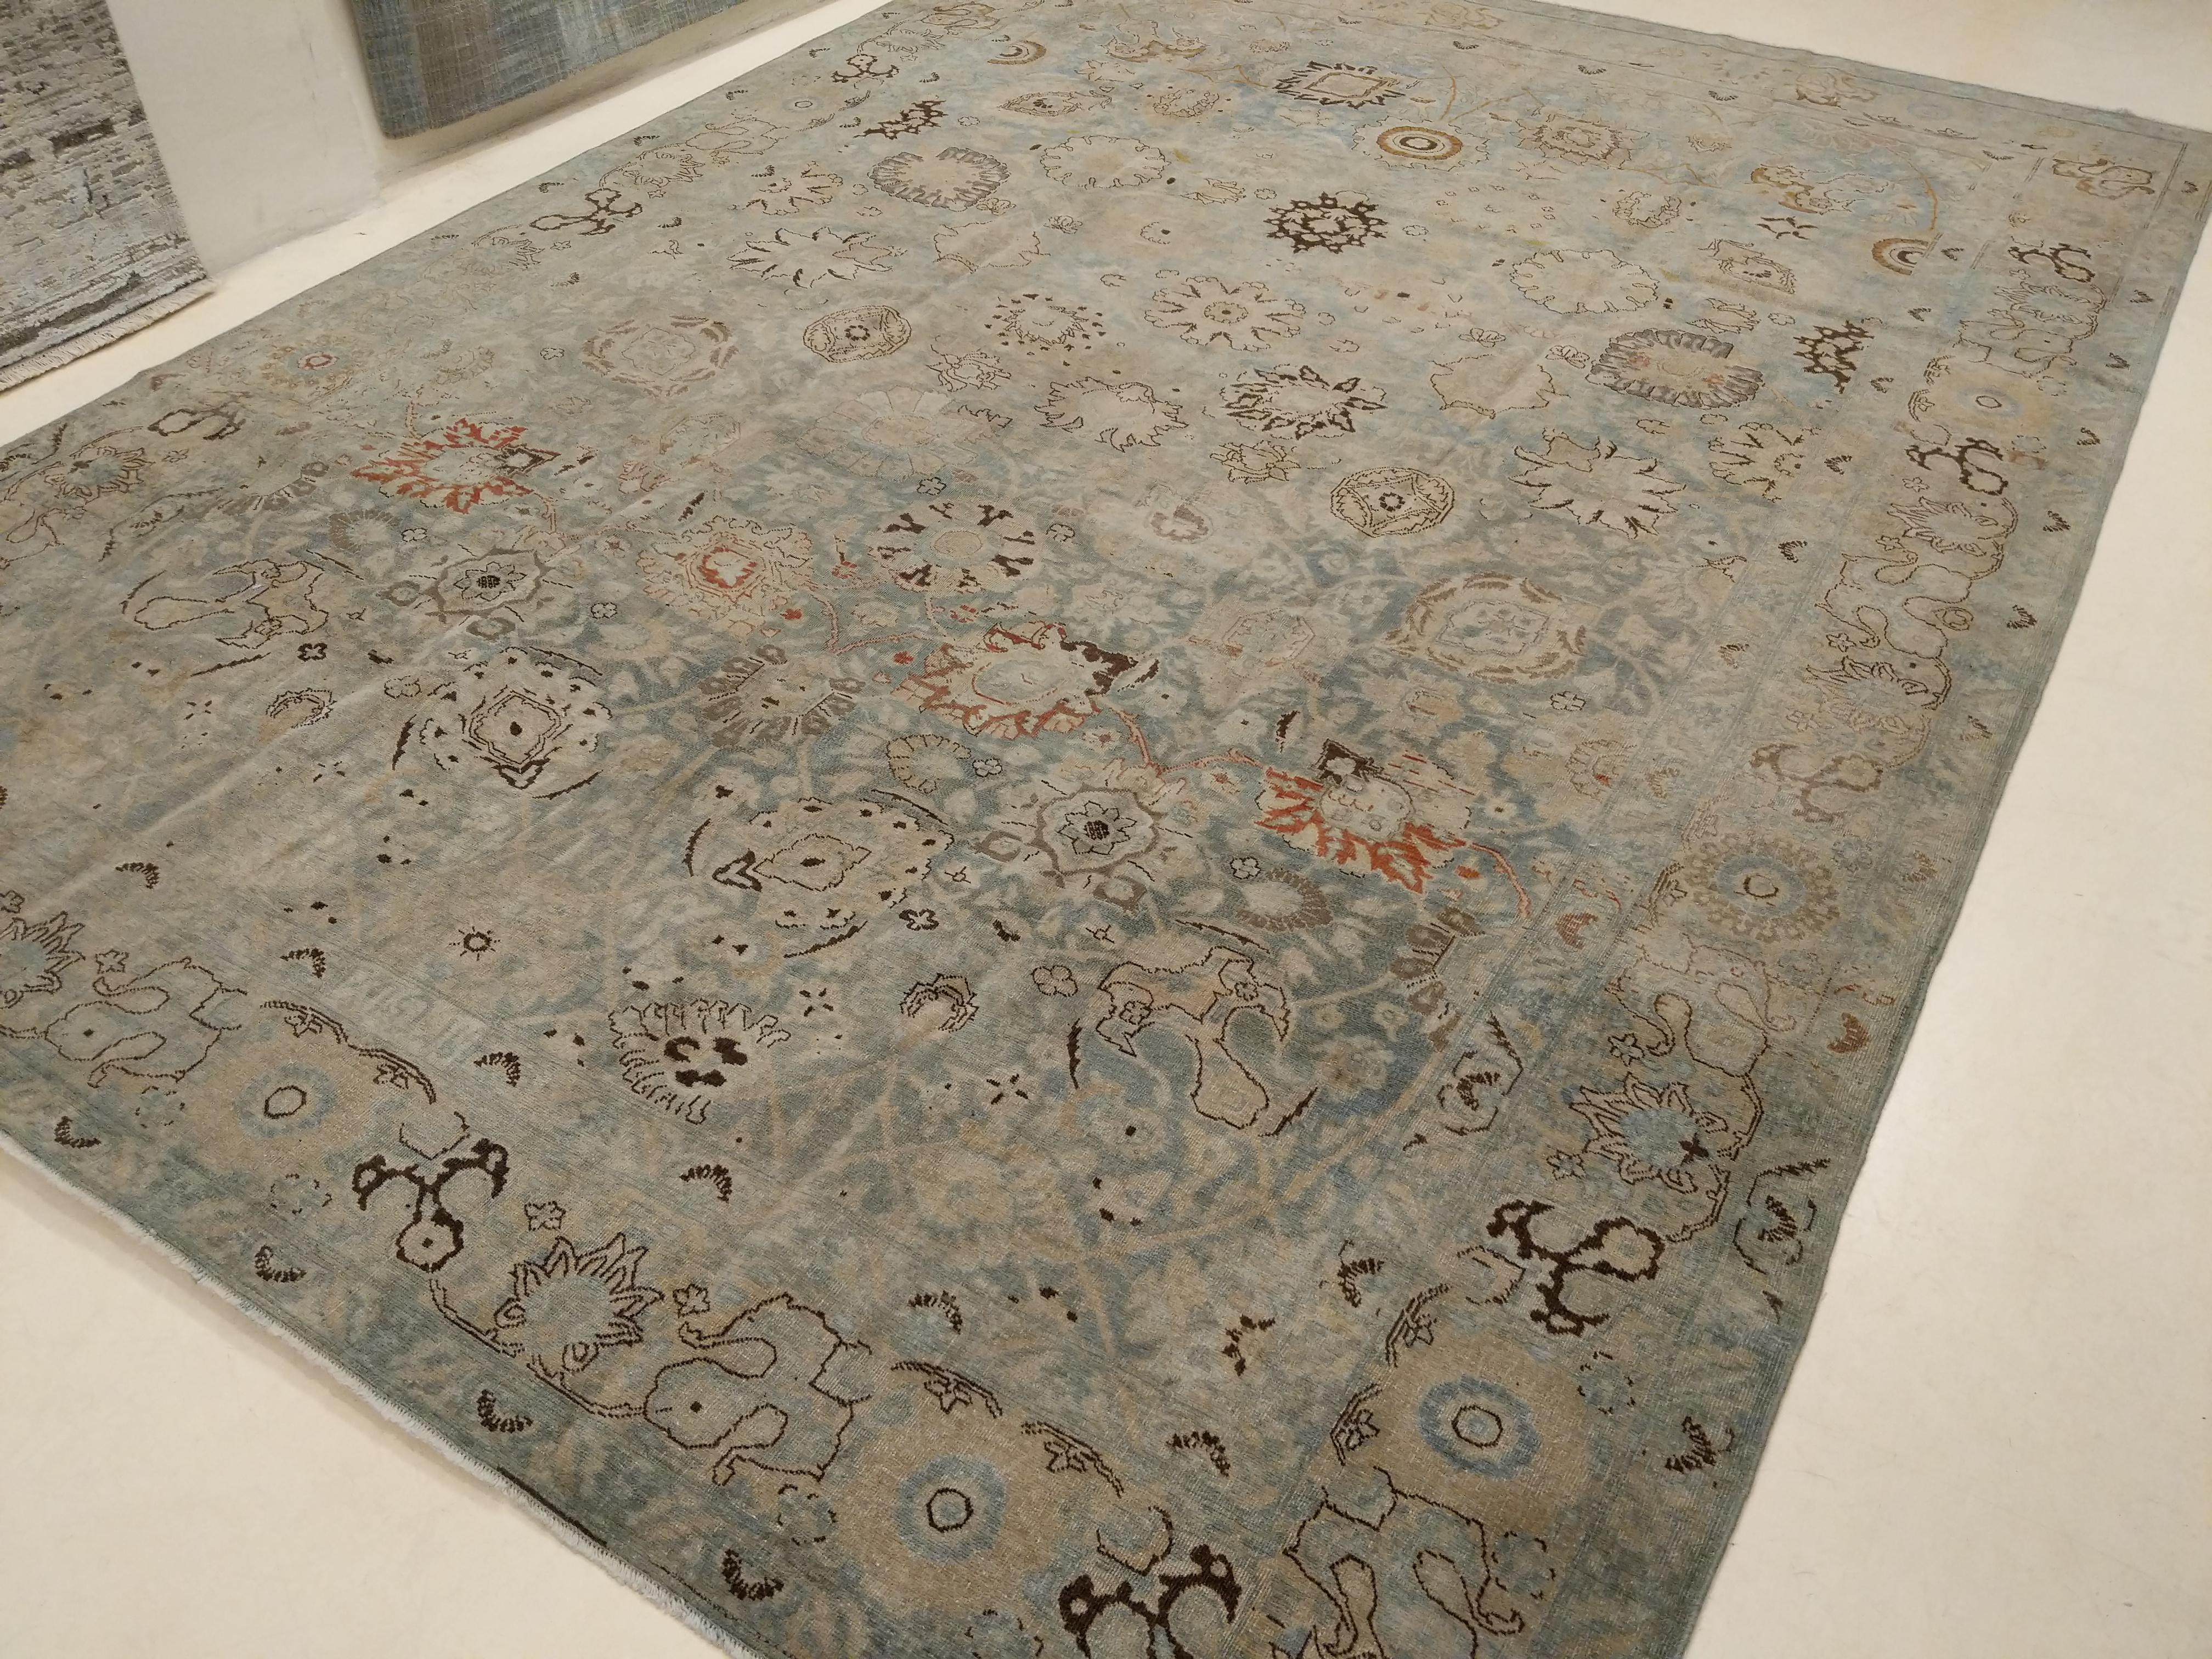 A finely woven old Turkish Sivas carpet of great nobility, distinguished by an infinite repeat pattern of delicately colored large scale palmettes and rosettes floating on an aqua-teal background. Among our most beautiful recent acquisitions in